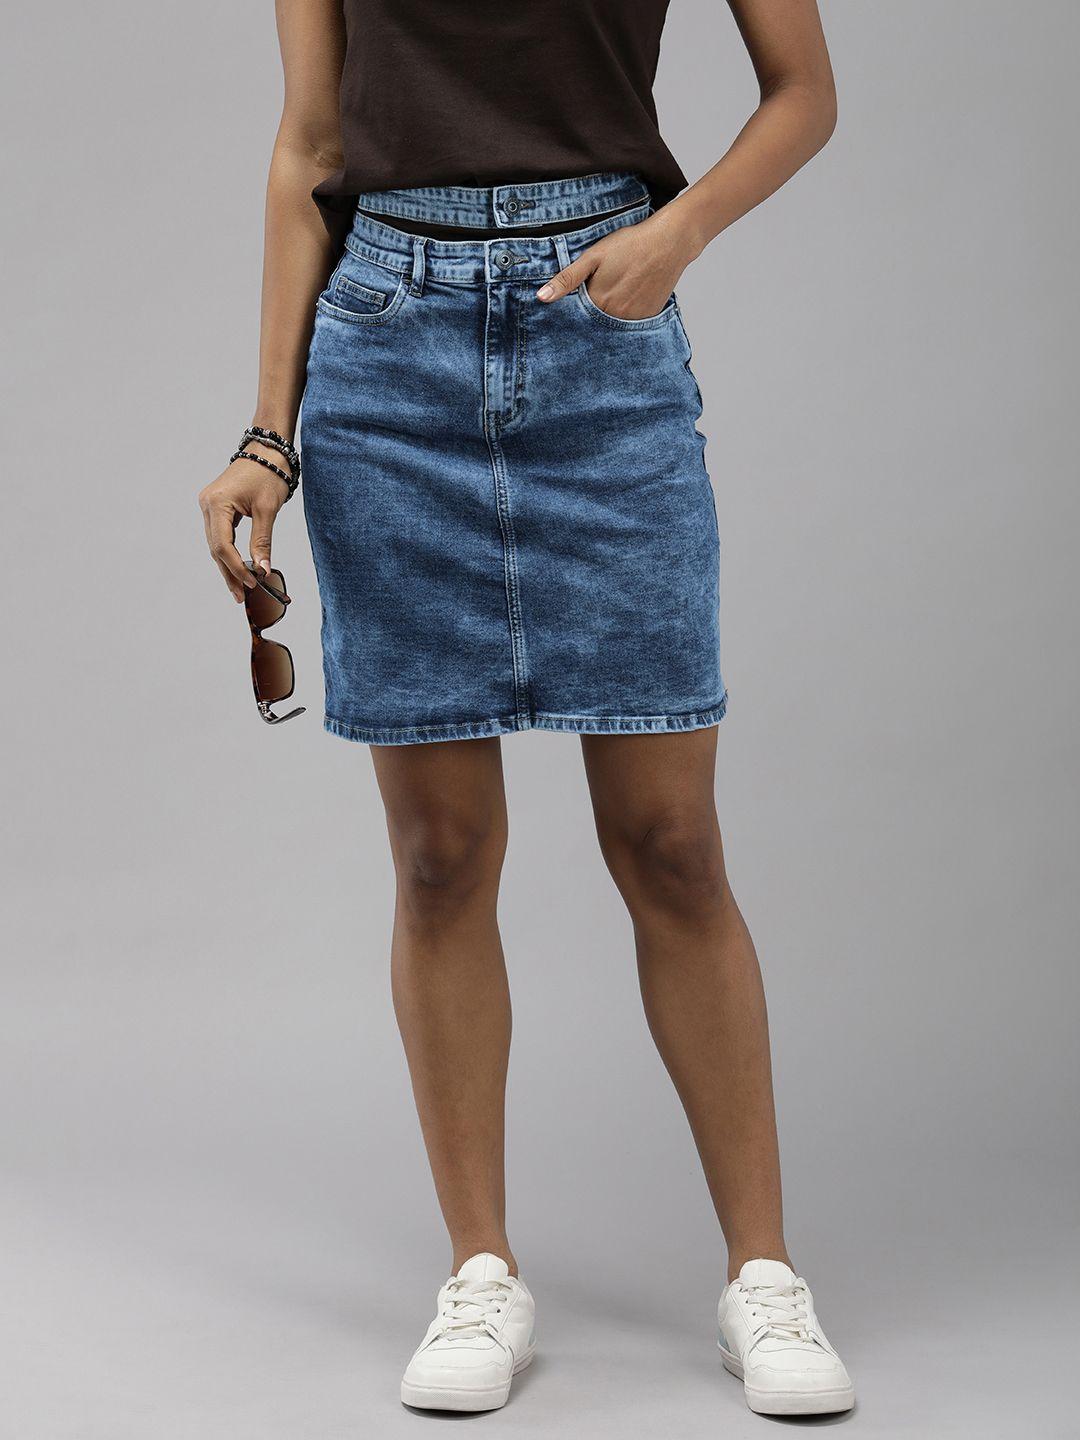 the roadster lifestyle co. women denim straight skirt with cut out detailing